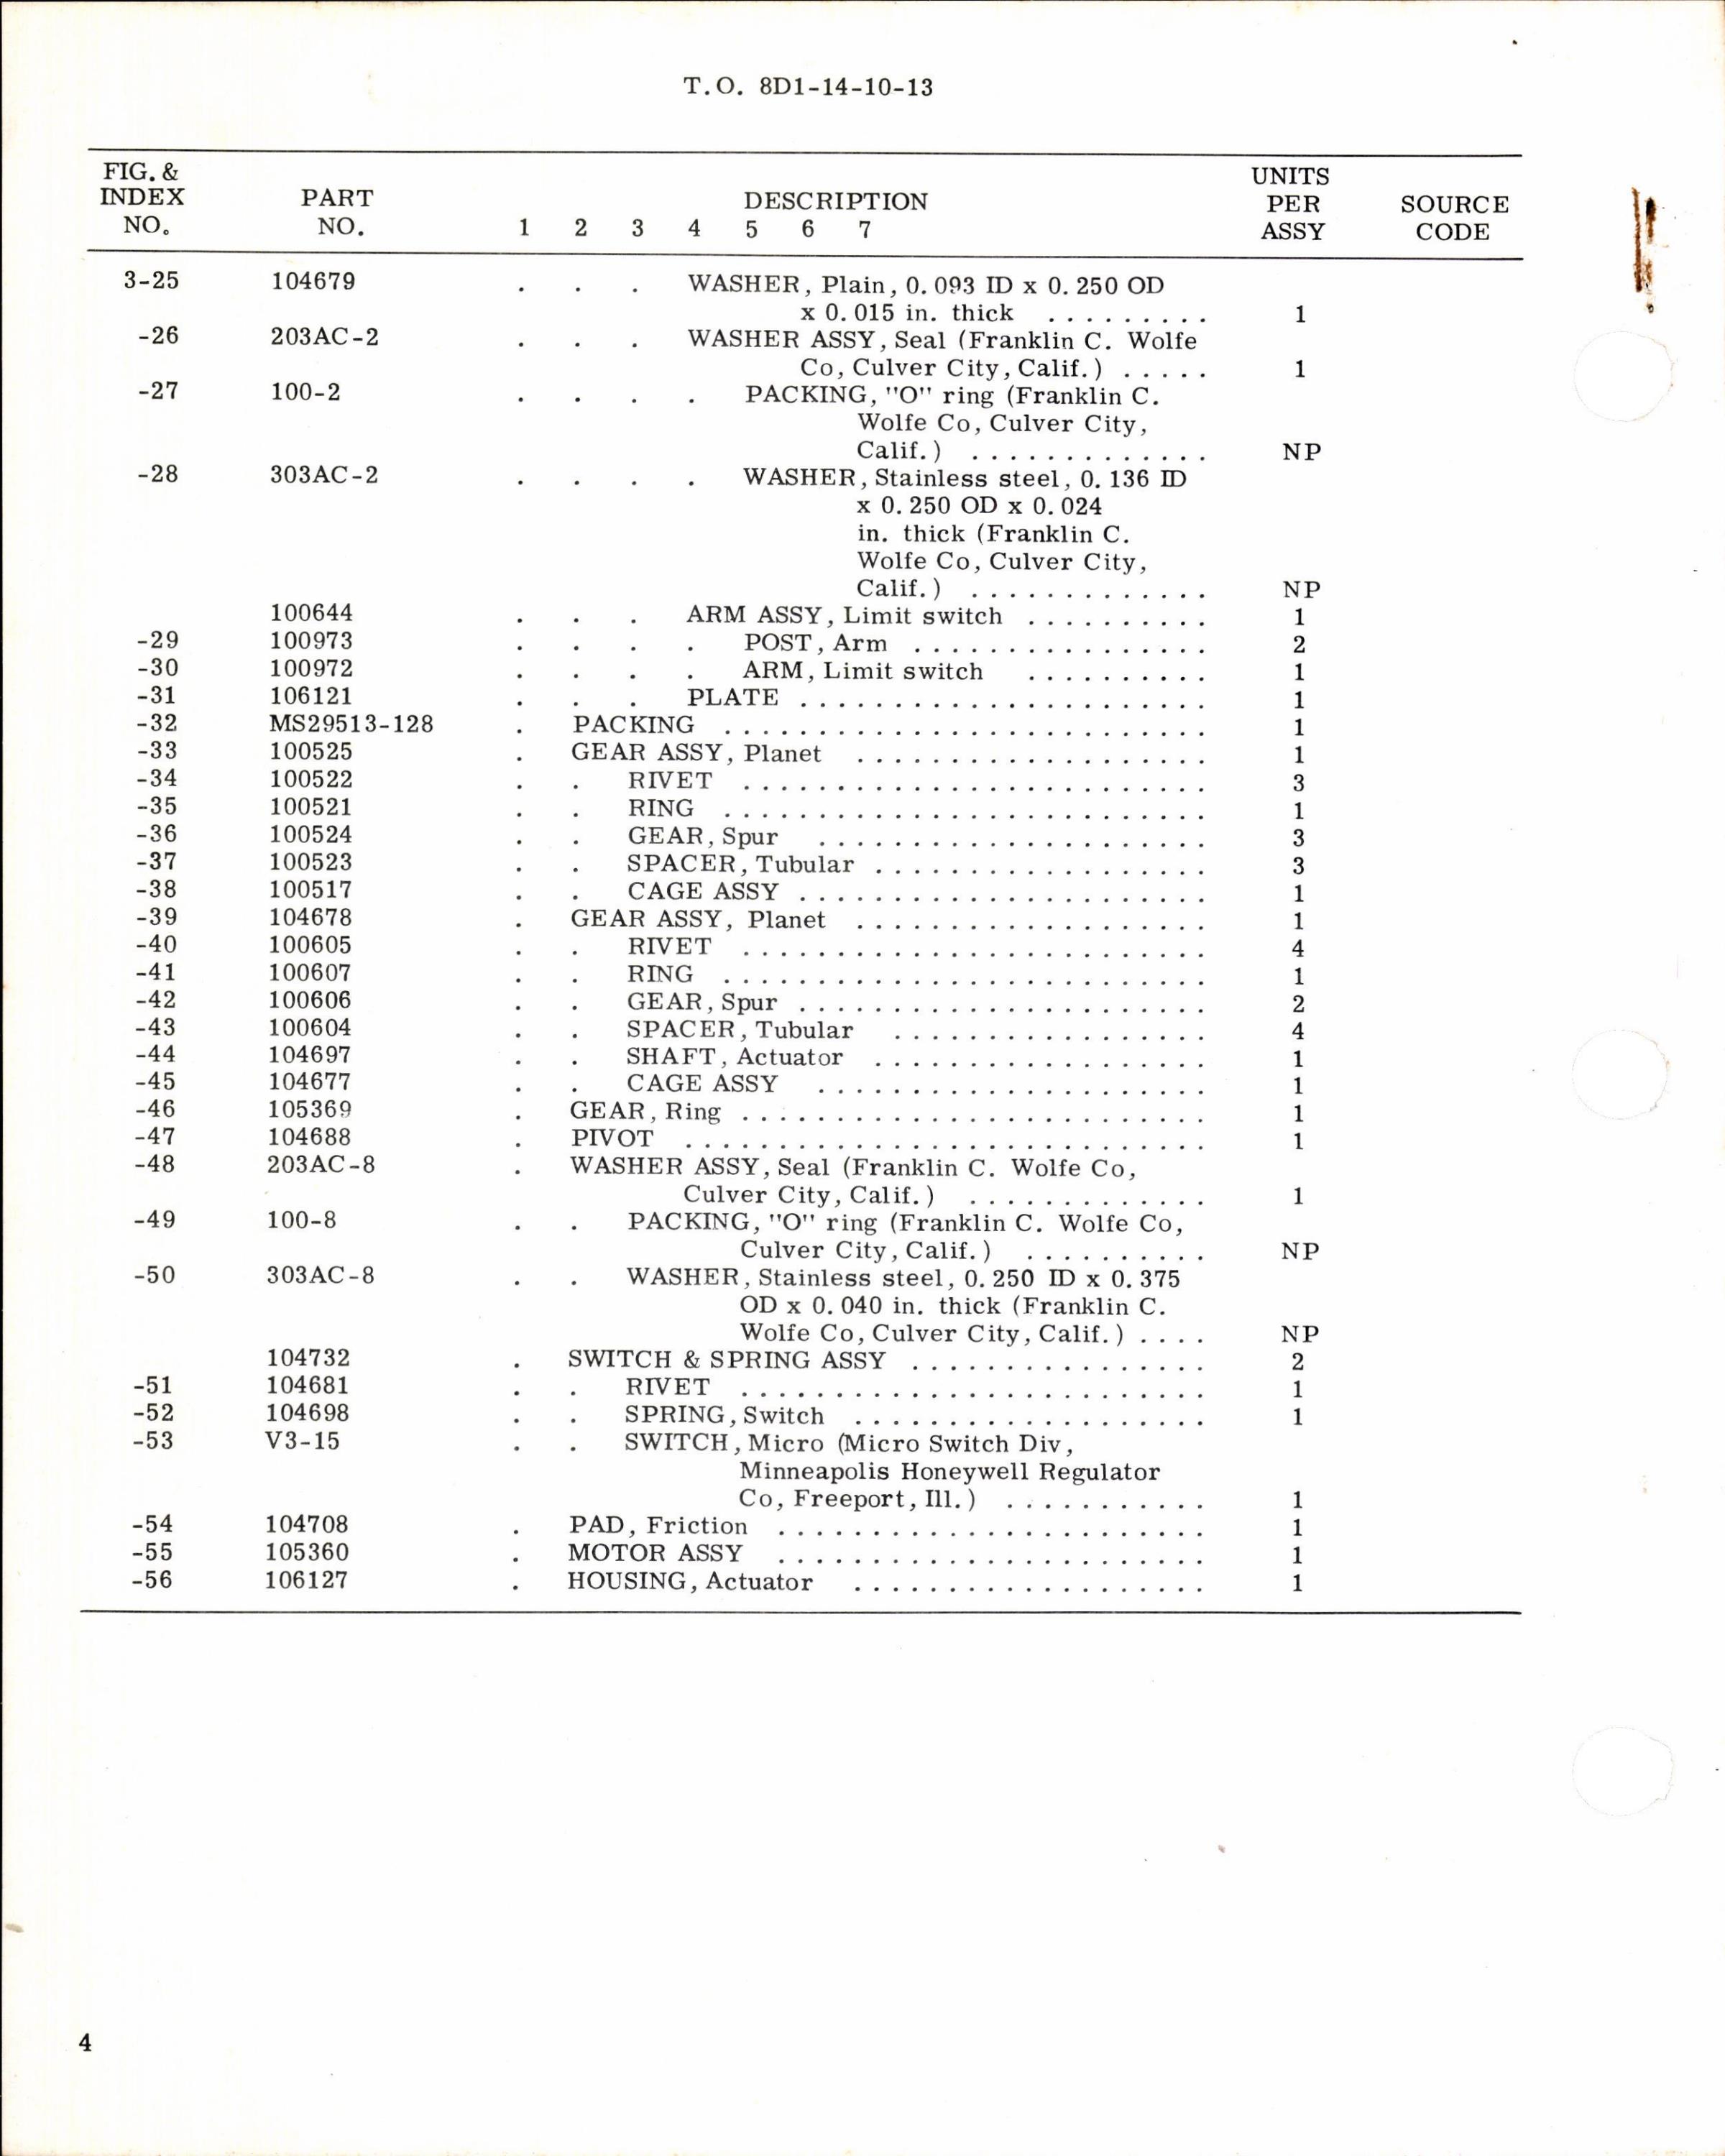 Sample page 4 from AirCorps Library document: Instructions w Parts Breakdown for Actuator Assembly No 106128